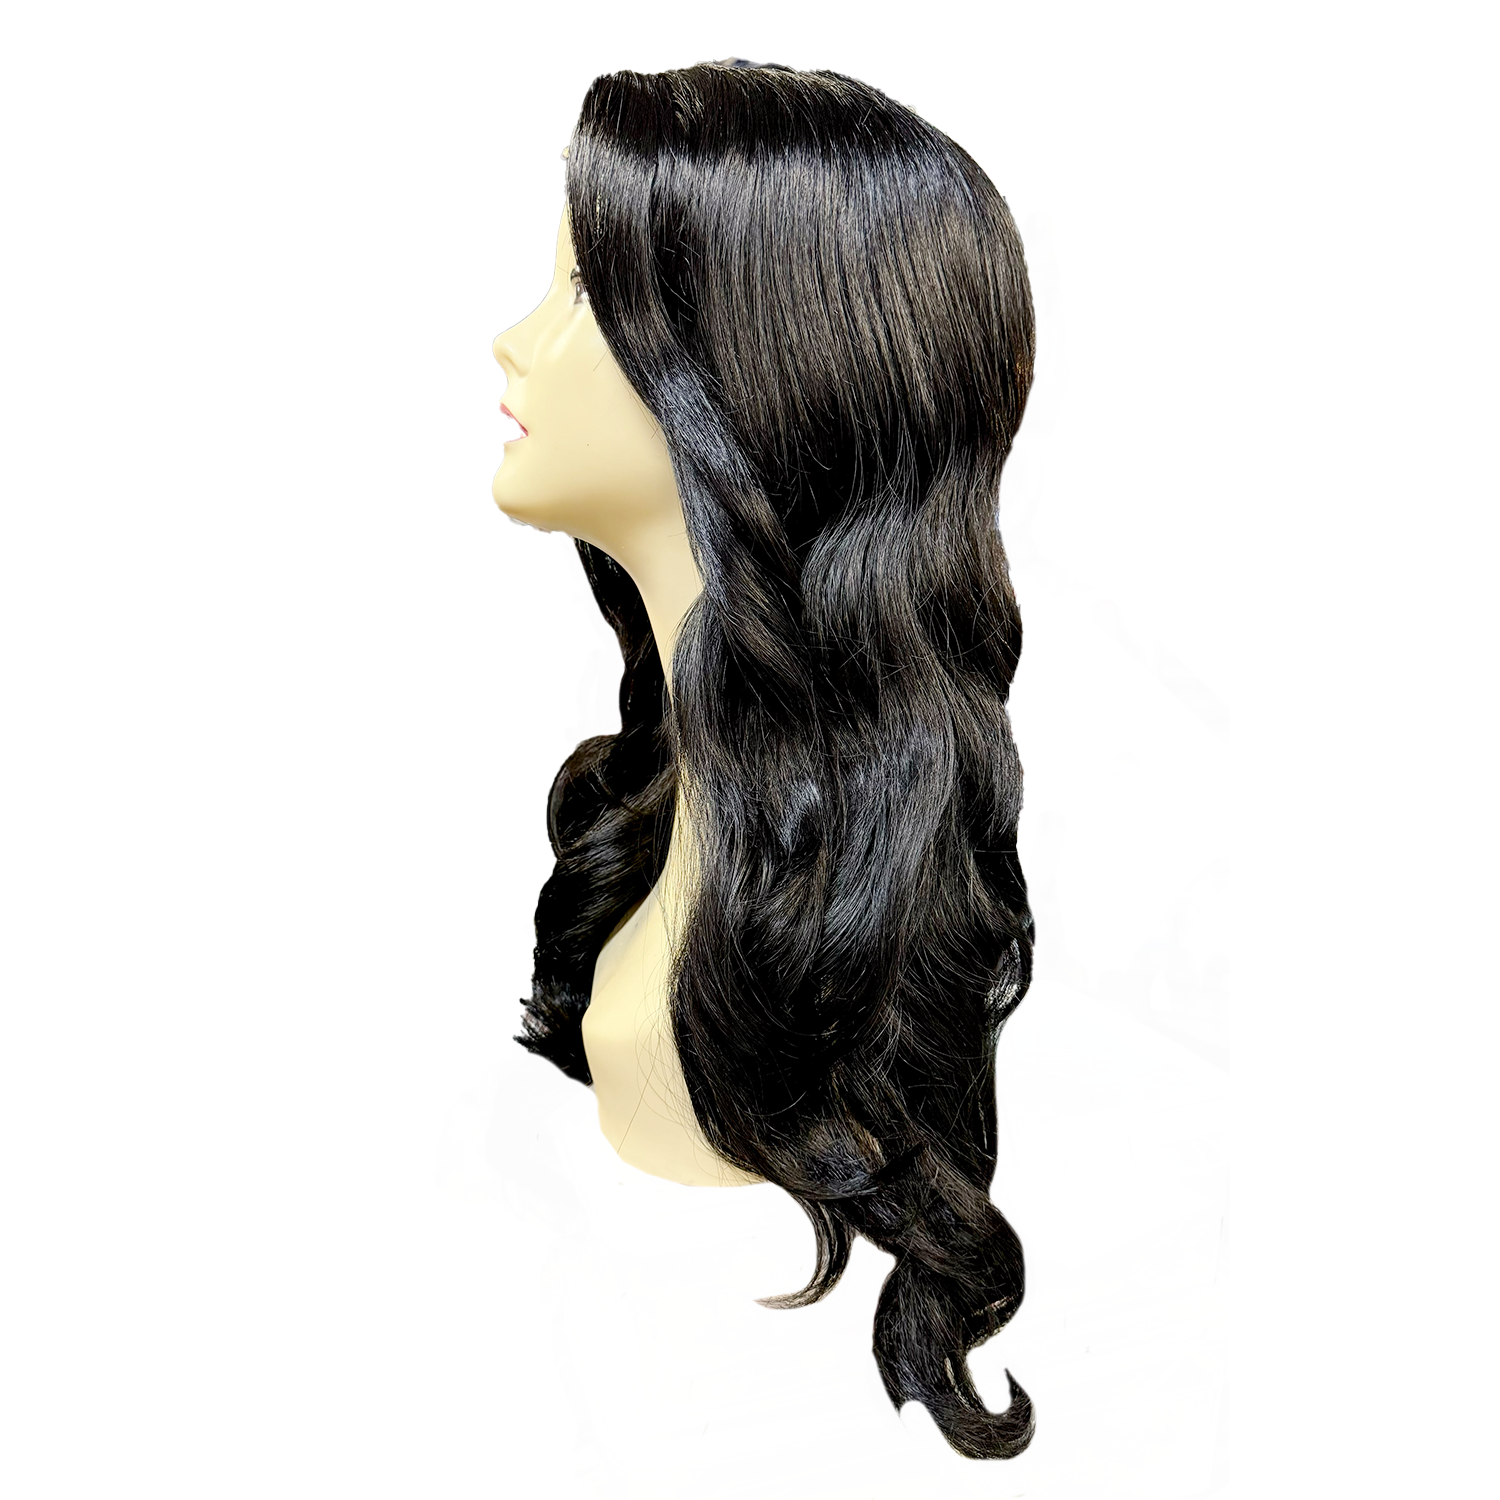 Scarlet Long Body Wave Style Synthetic Wig